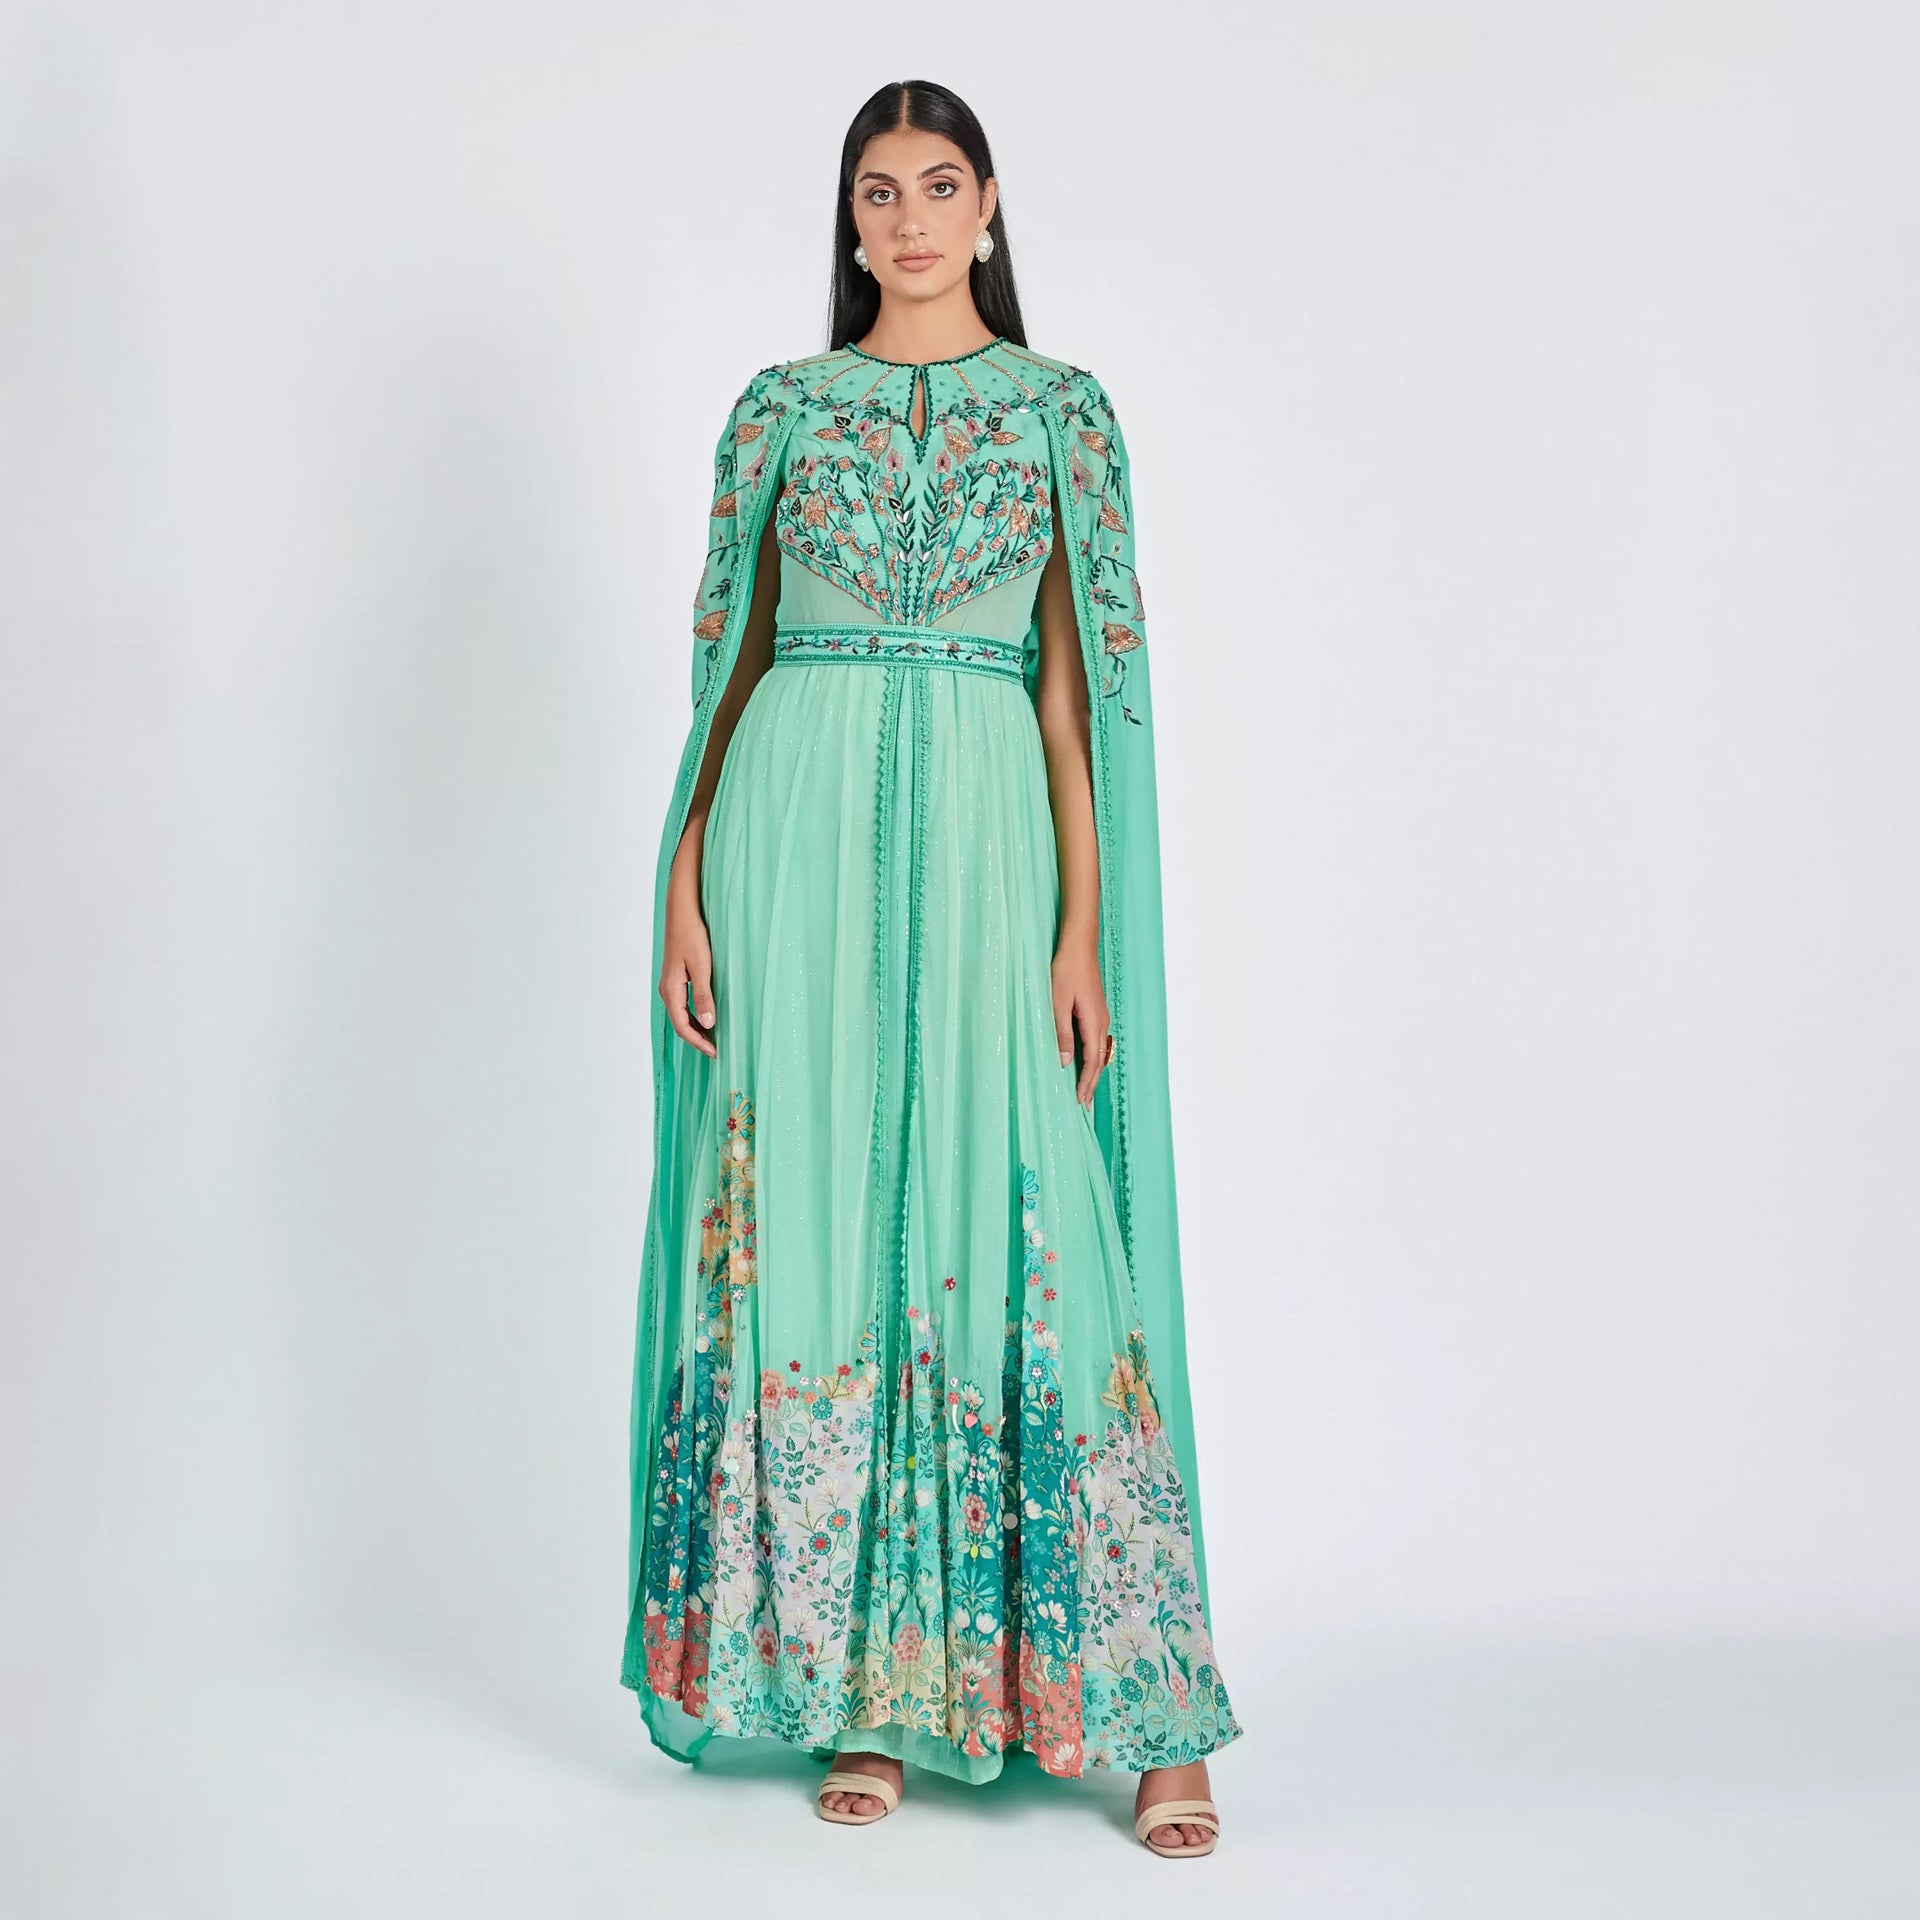 Turquoise Embroidery Samantha Dress From Shalky